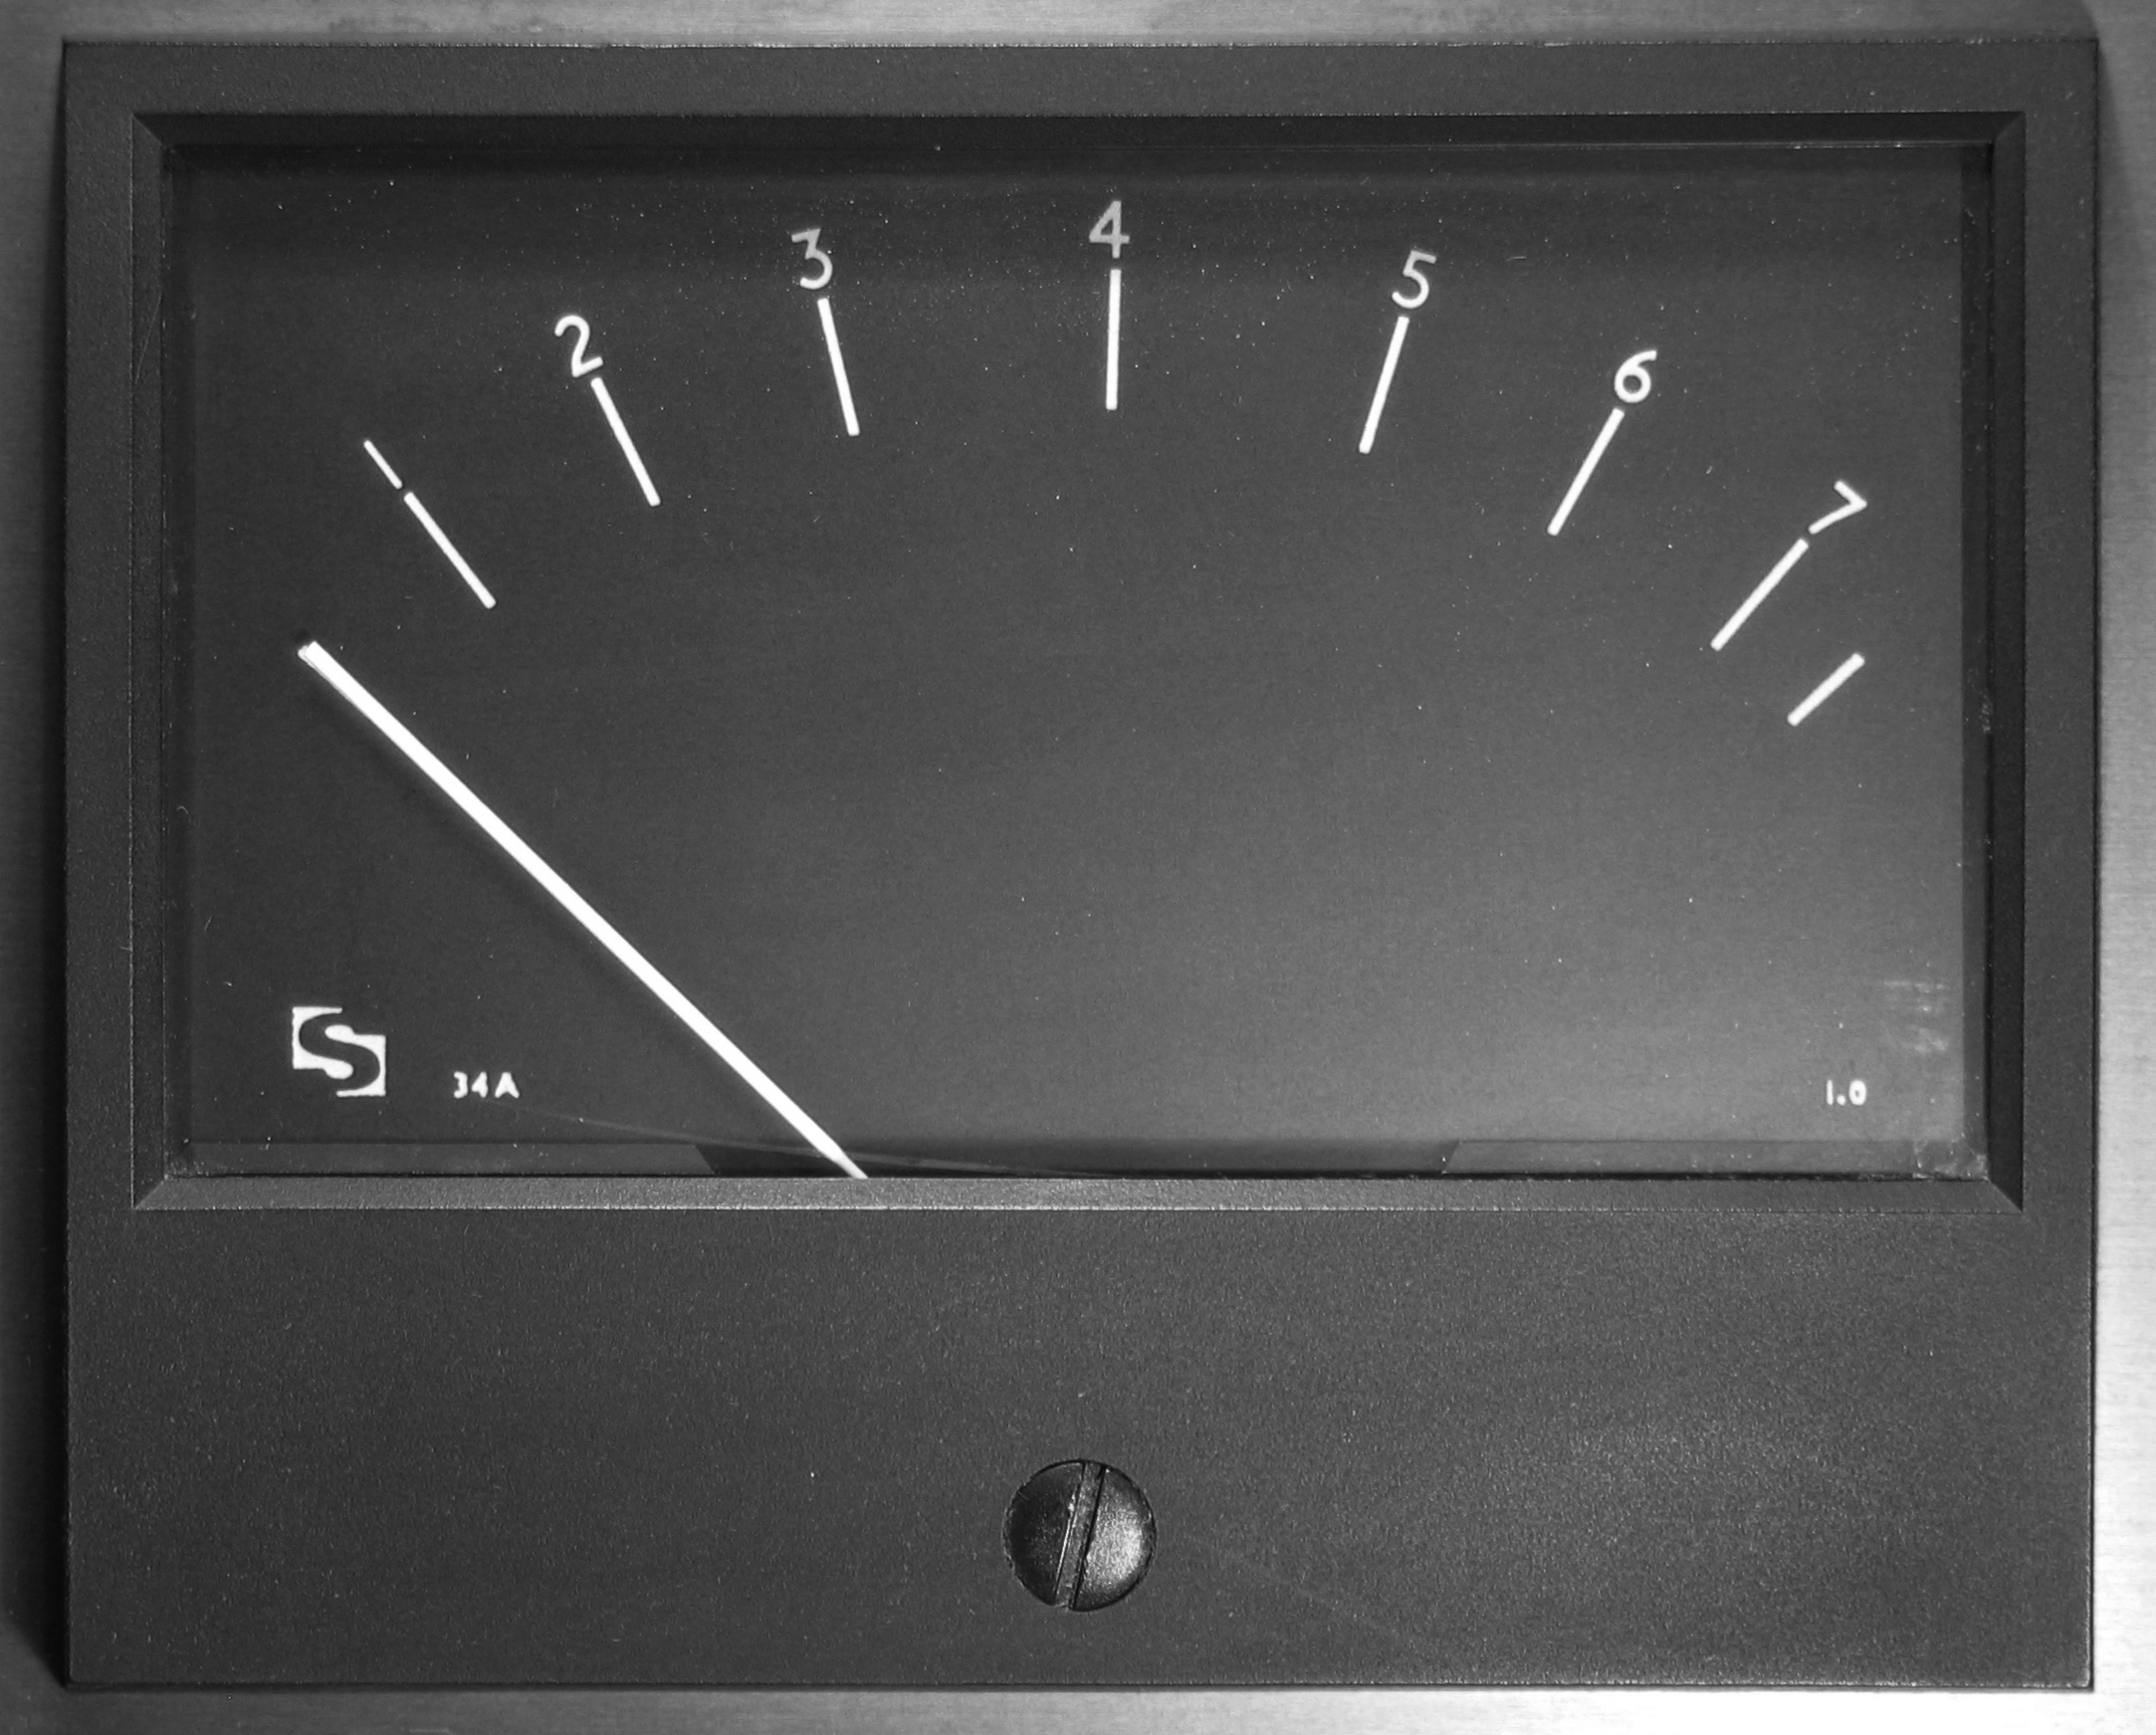 A Sifam PPM peak programme meter, the old method of measuring the loudness of TV commercials and programming.